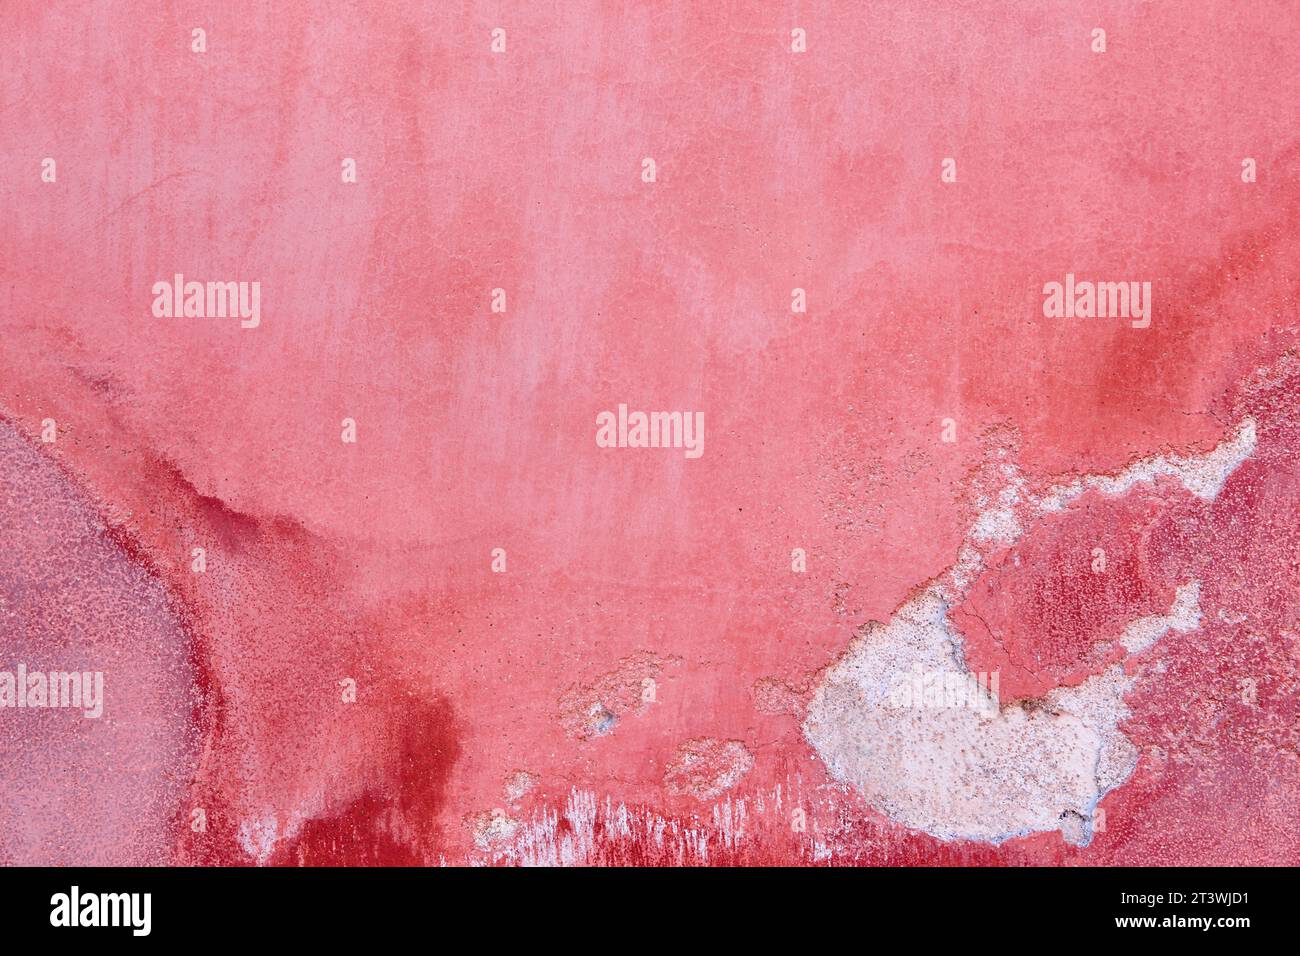 Damp stains on a red wall. Home damage and renovation Stock Photo